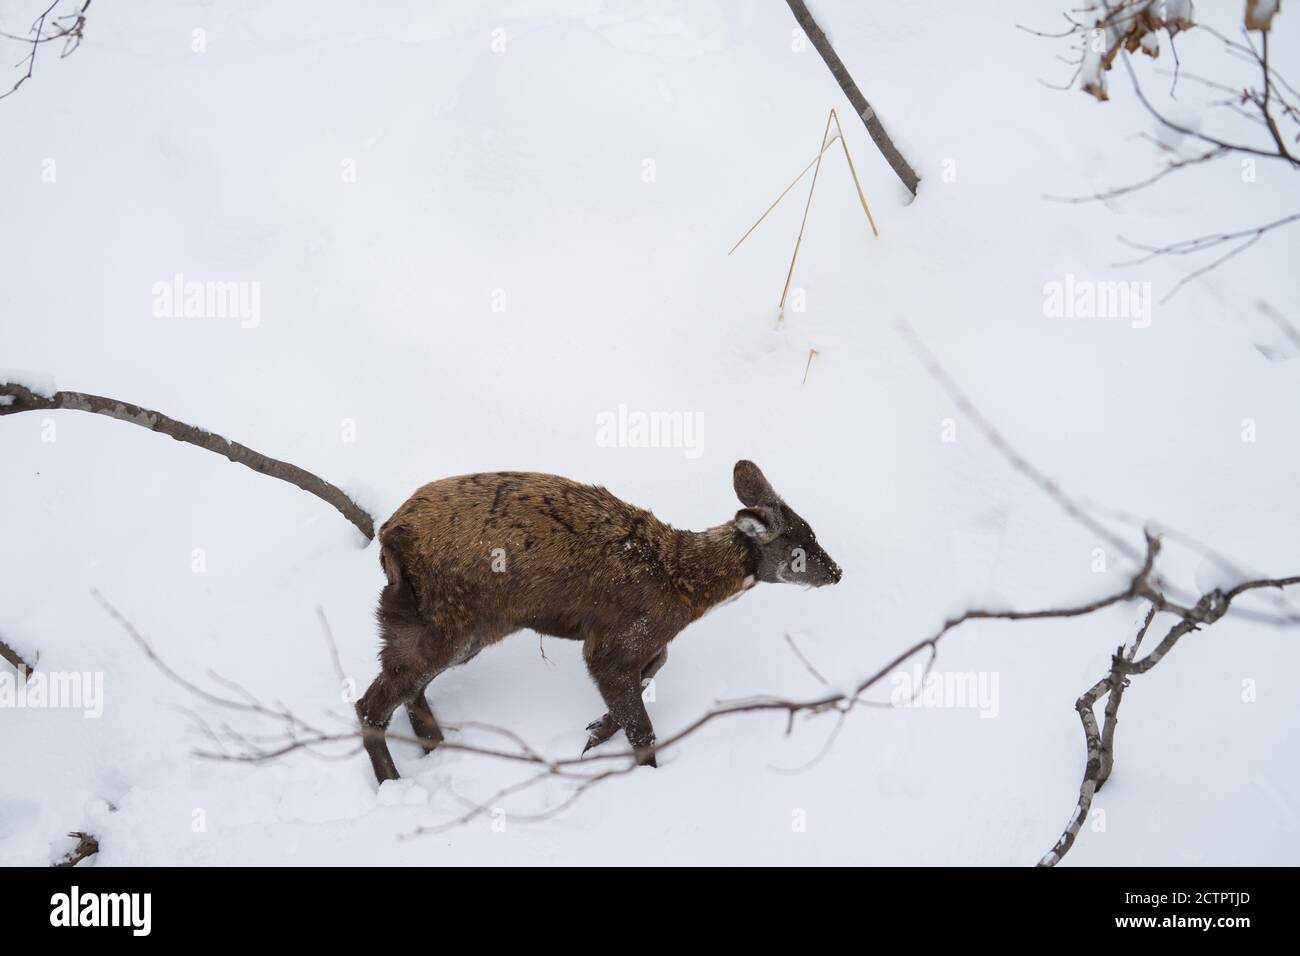 A male musk deer walks in the snow in winter. The fang is visible. Side or elevation view. Stock Photo